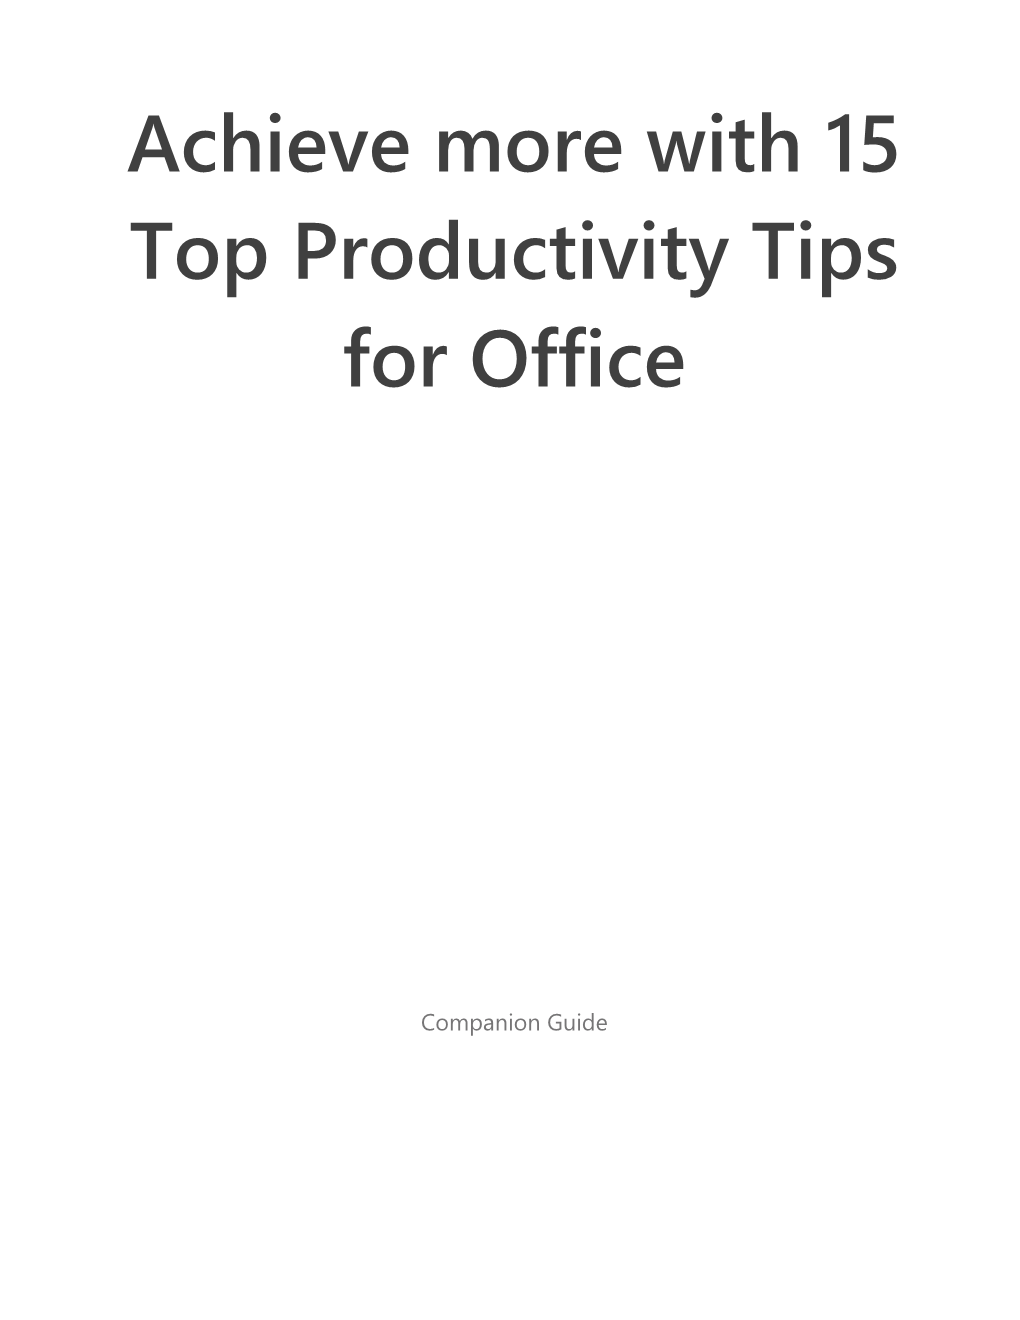 Achieve More with 15 Top Productivity Tips for Office